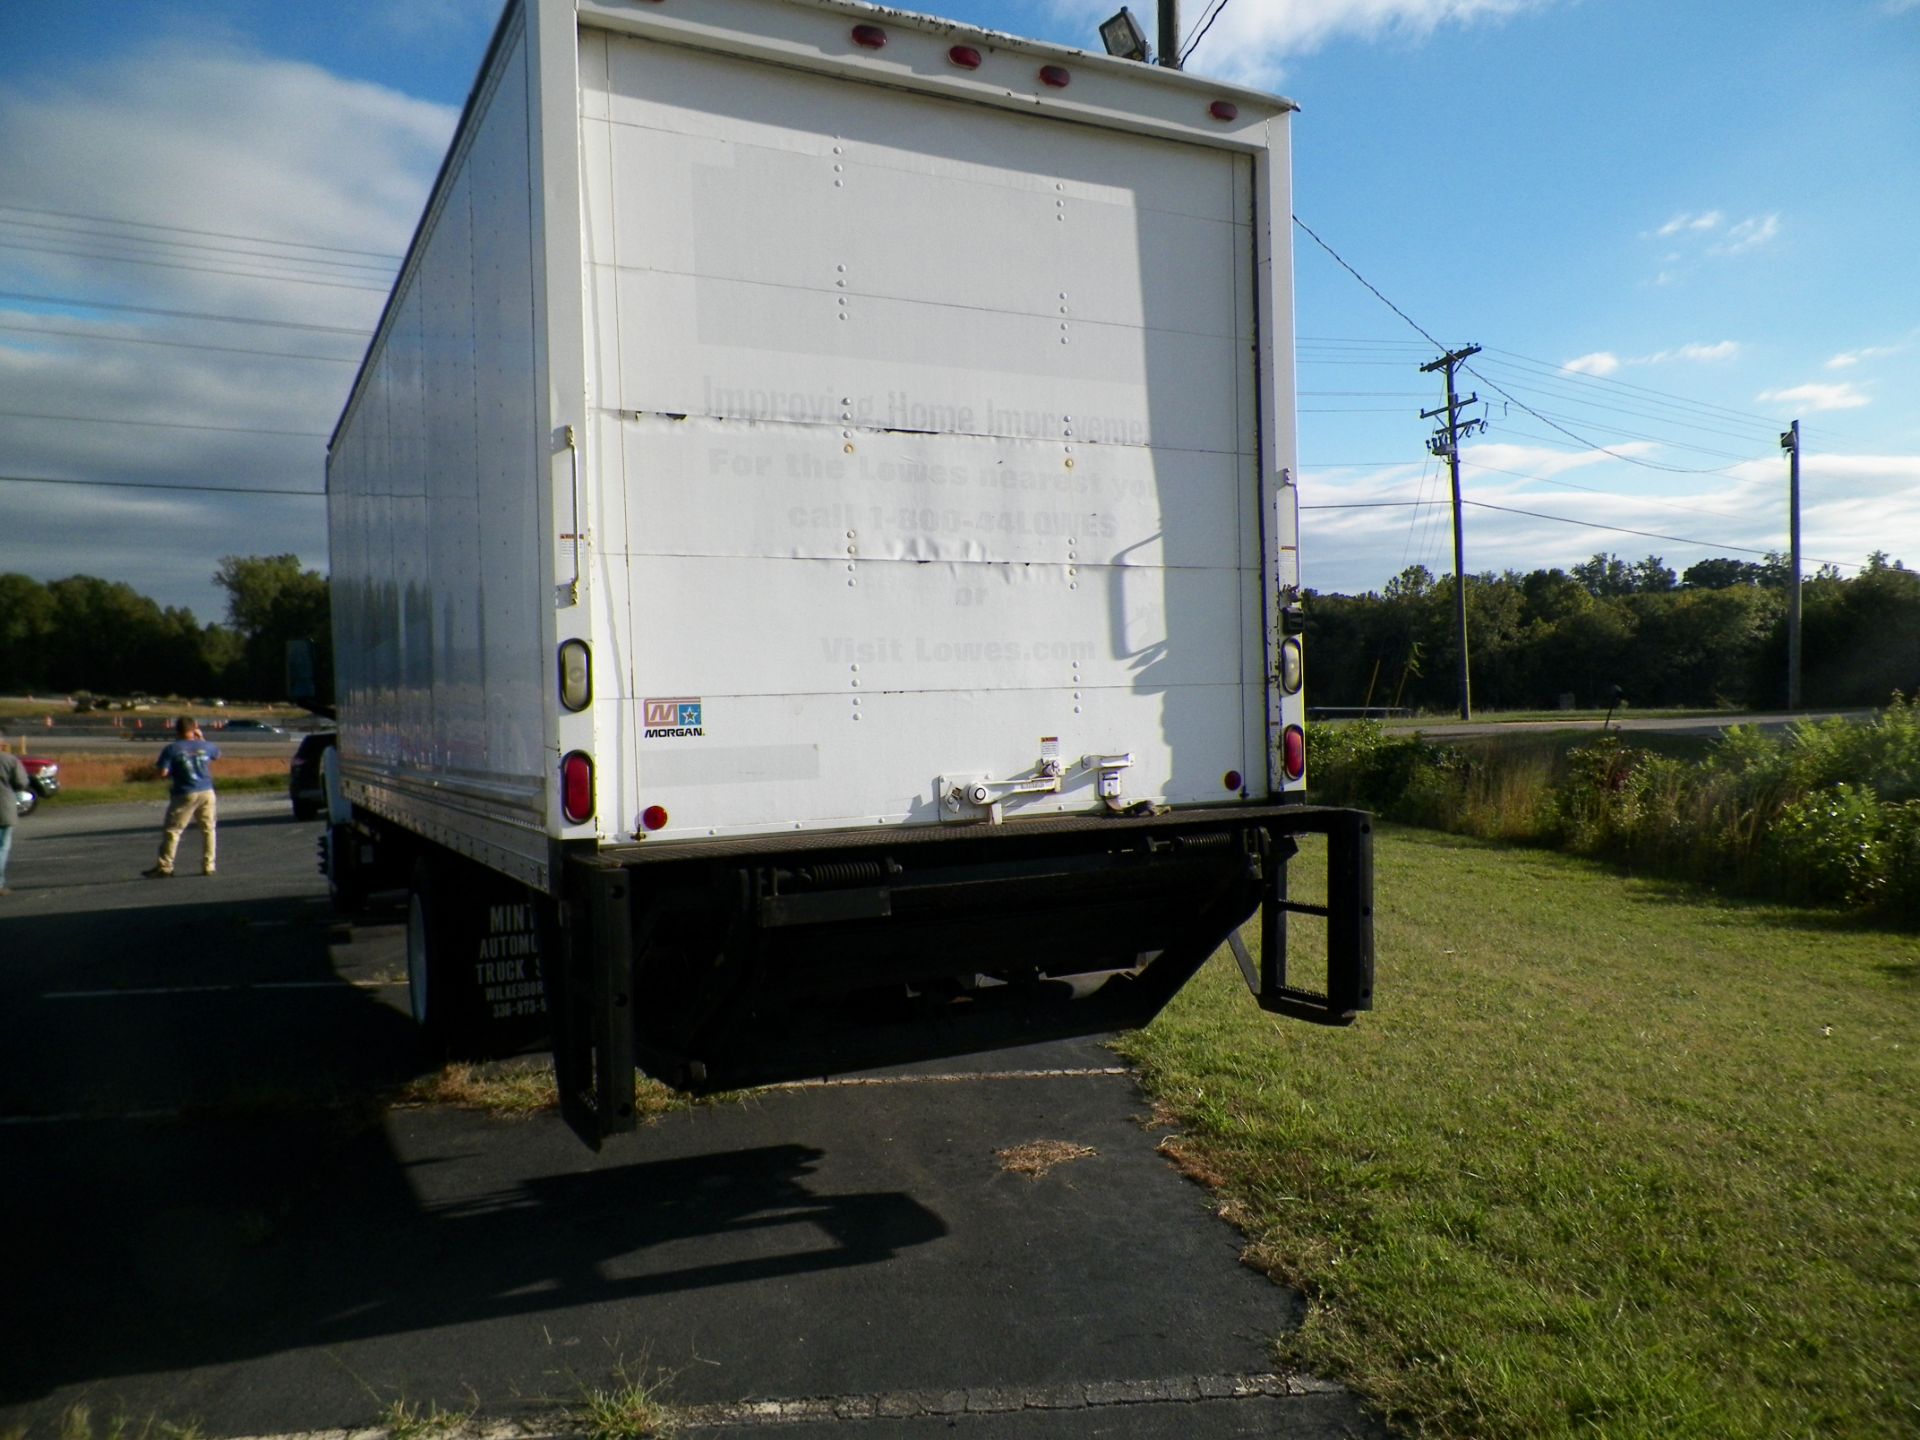 2004 c-6500 Chevrolet 24’ Box Truck with lift gate - Image 3 of 3